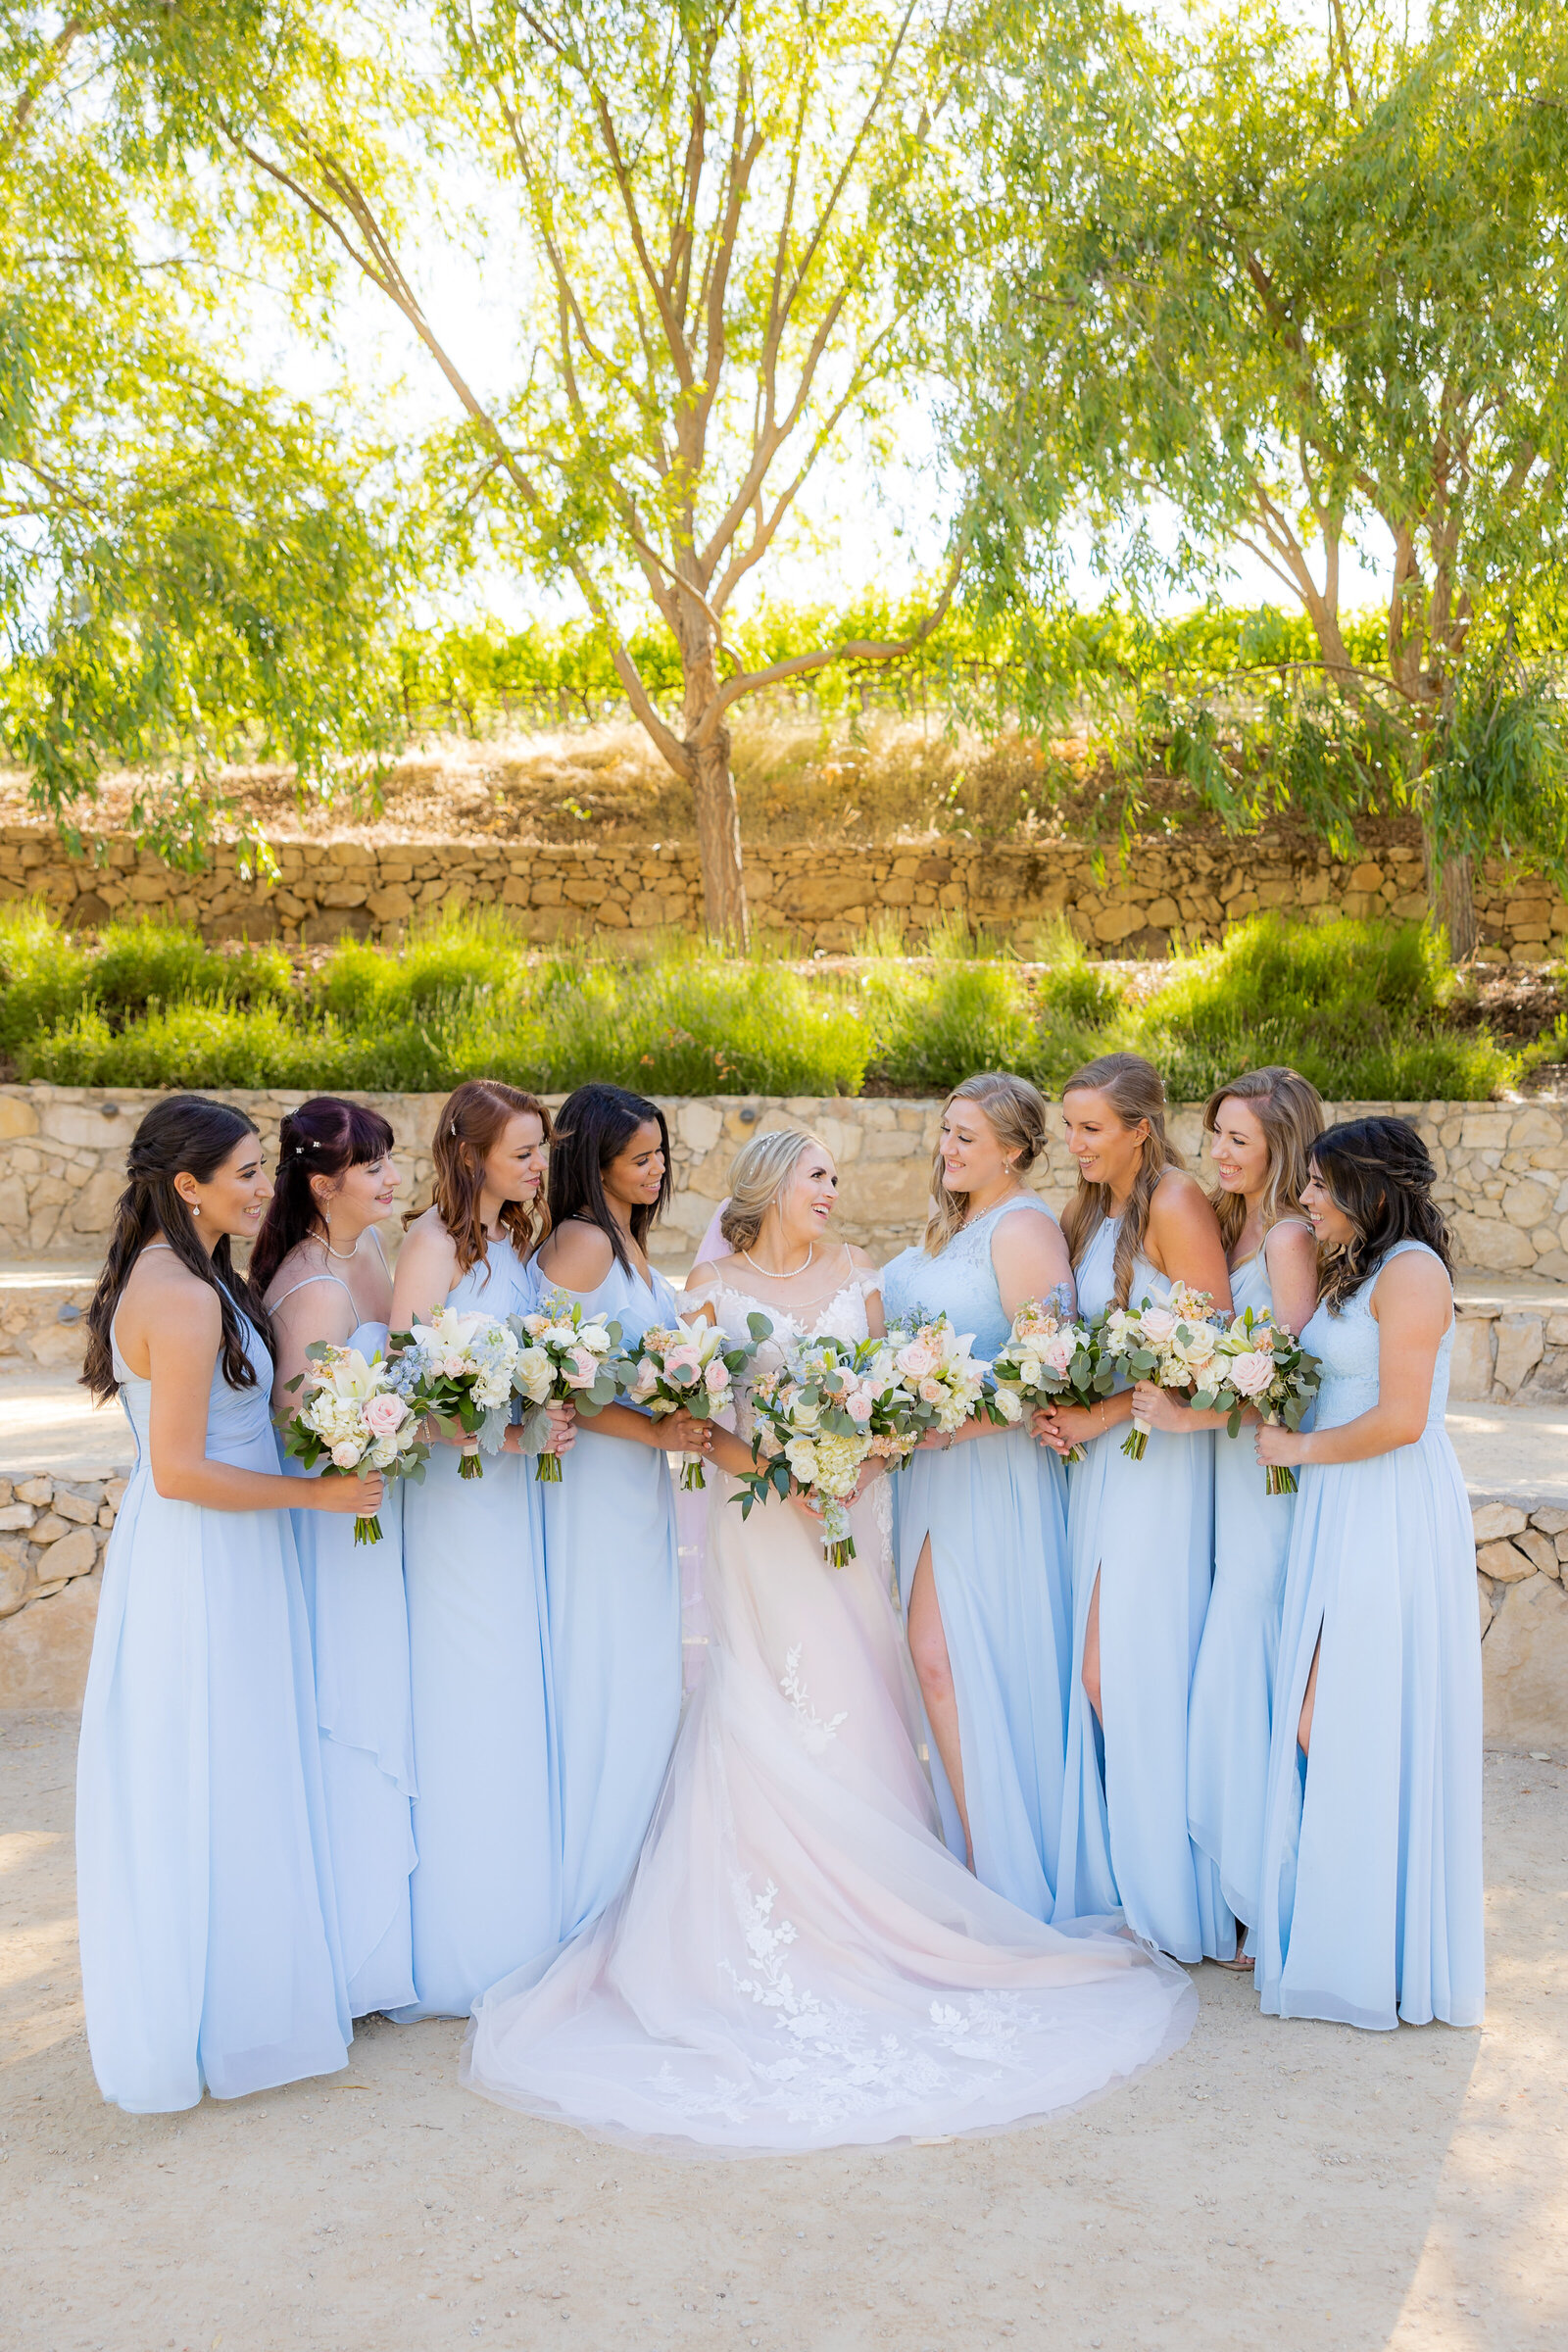 Bridesmaids stand around bride and smiles at her while she smiles back at them. They are wearing a baby blue color while bride is in white.  They are surrounded by greenery on the top. Photo taken by Sacramento Wedding Photographer, Philippe Studio Pro.